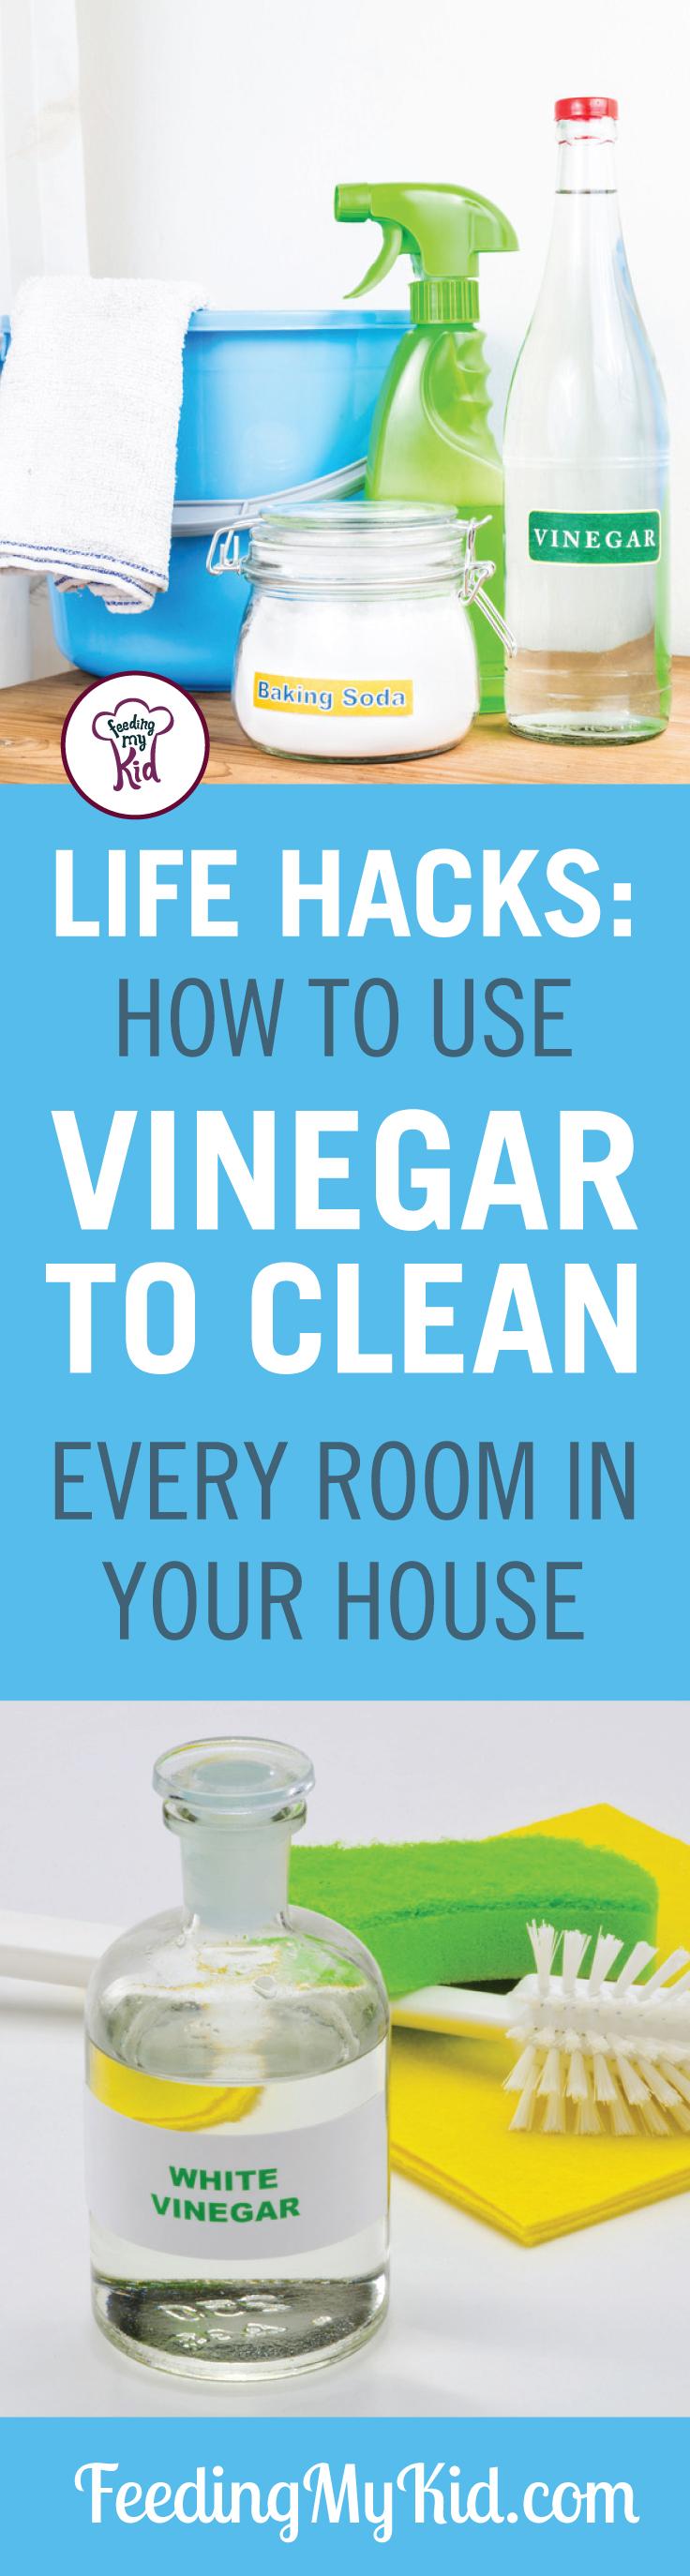 Cleaning with vinegar? What's all the rave on vinegar? Check out why you should clean with vinegar instead of those chemical cleaners.